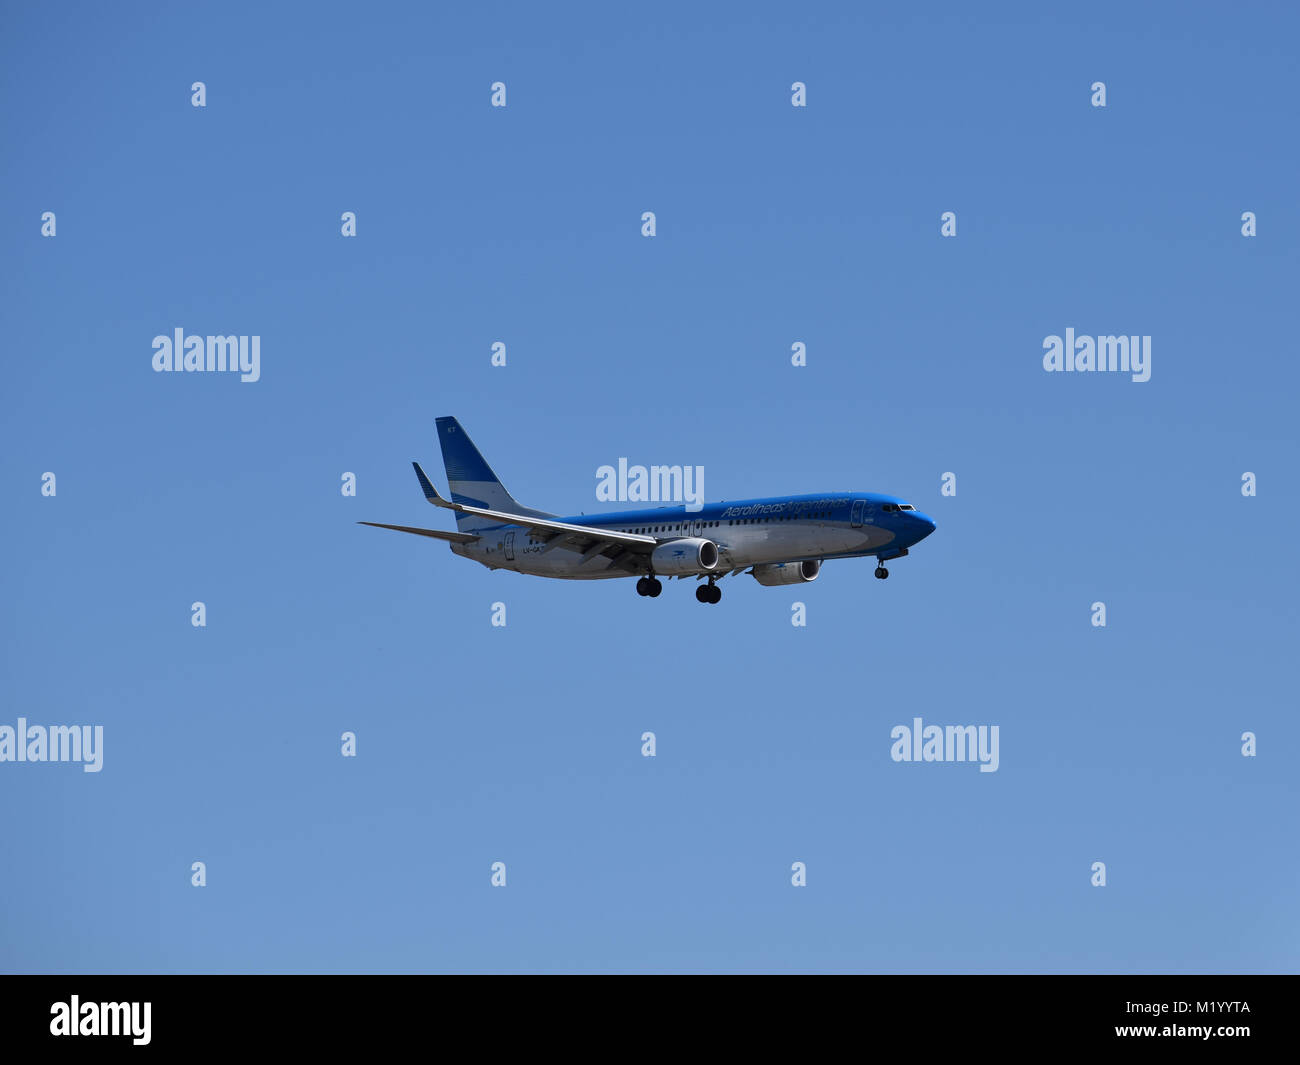 Buenos Aires/Argentina - 29-01-2018: Boeing 737-800 aircraft of Aerolineas Argentinas approaches Aeroparque Jorge Newbery airport, Buenos Aires Stock Photo